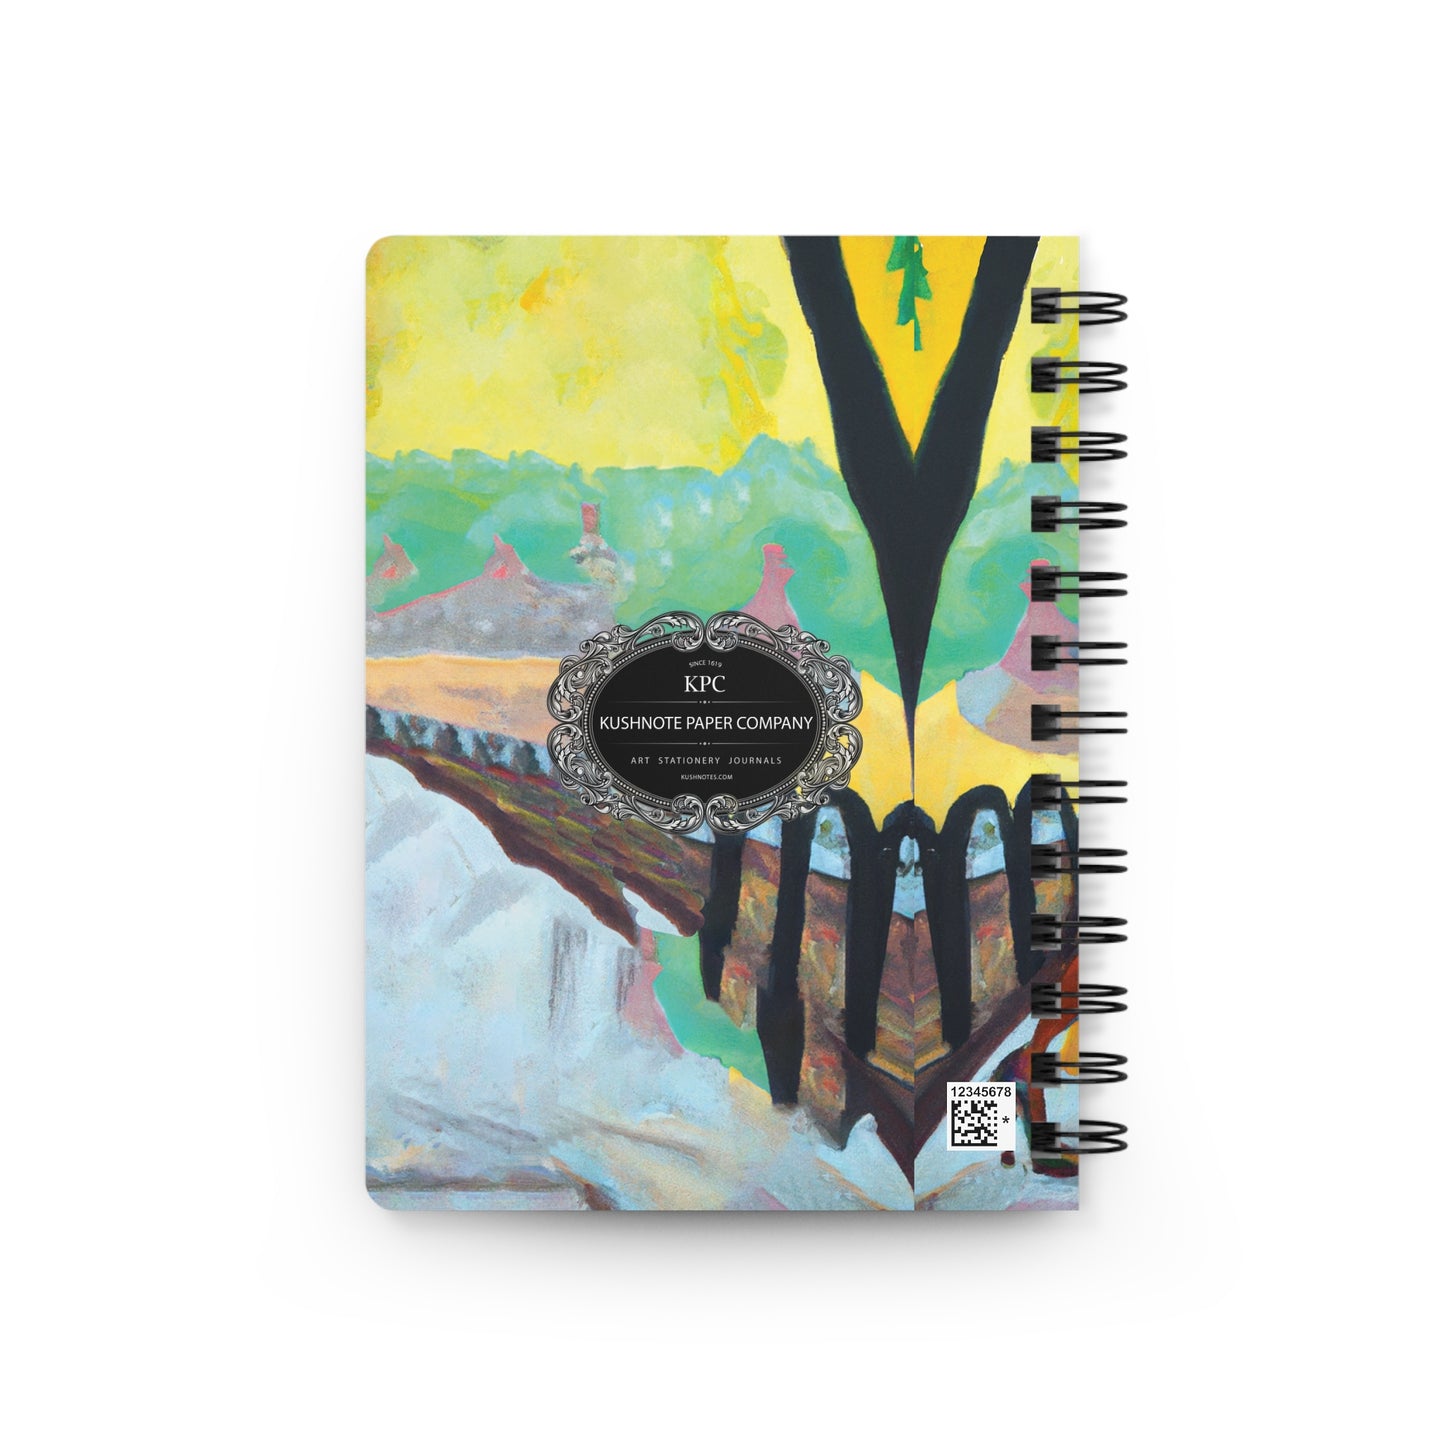 Silk Spiral Bound Notebooks and Journals with 2023-2024 Year-at-a-Glance Calendar